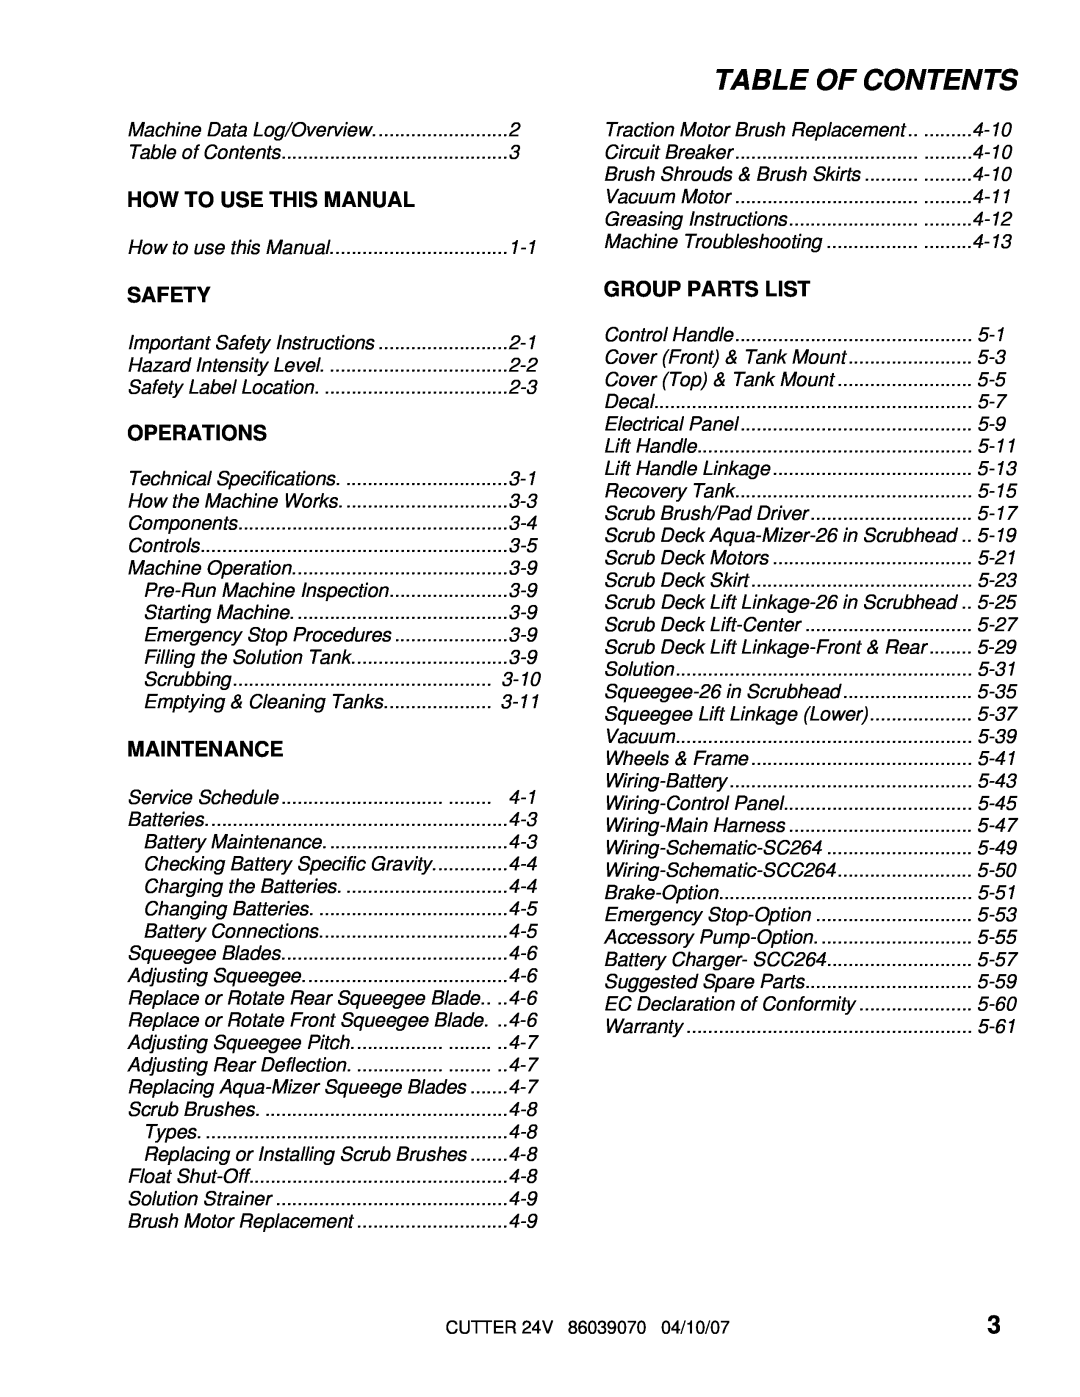 Windsor 10052210, SC264 manual Table Of Contents, Group Parts List, How To Use This Manual, Safety, Operations, Maintenance 